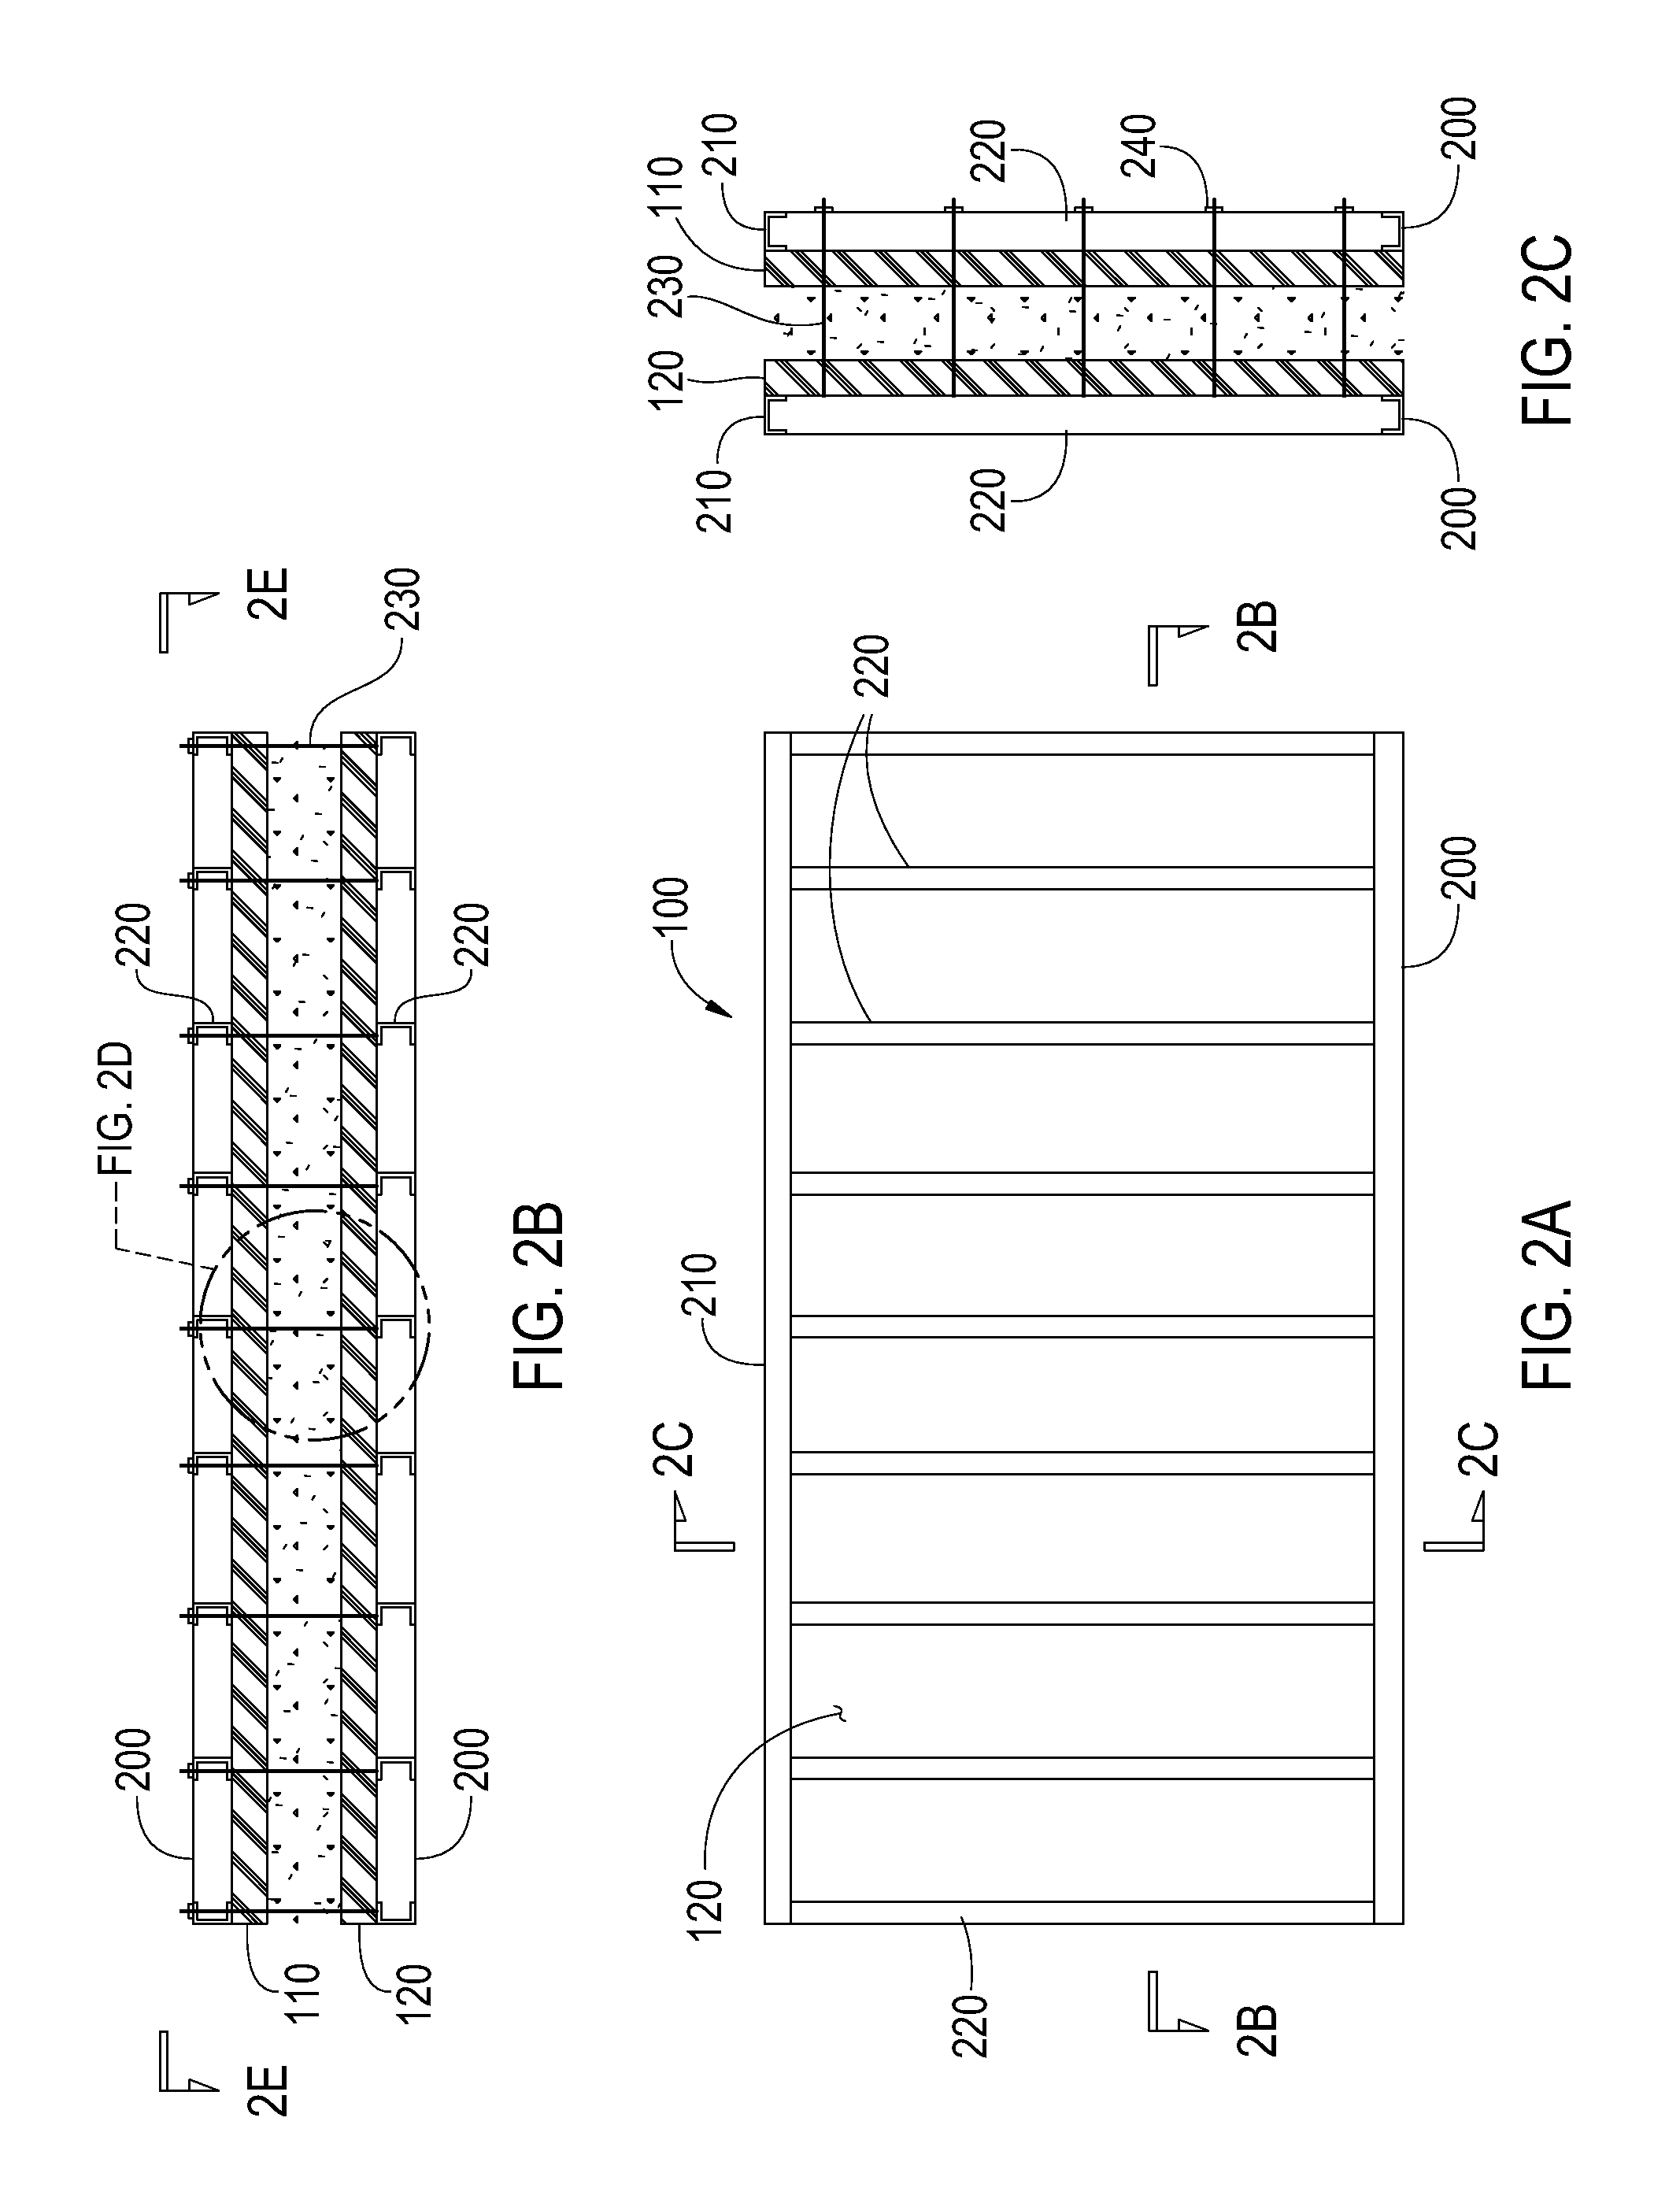 Pre-Engineered/Prefabricated Wall Assembly